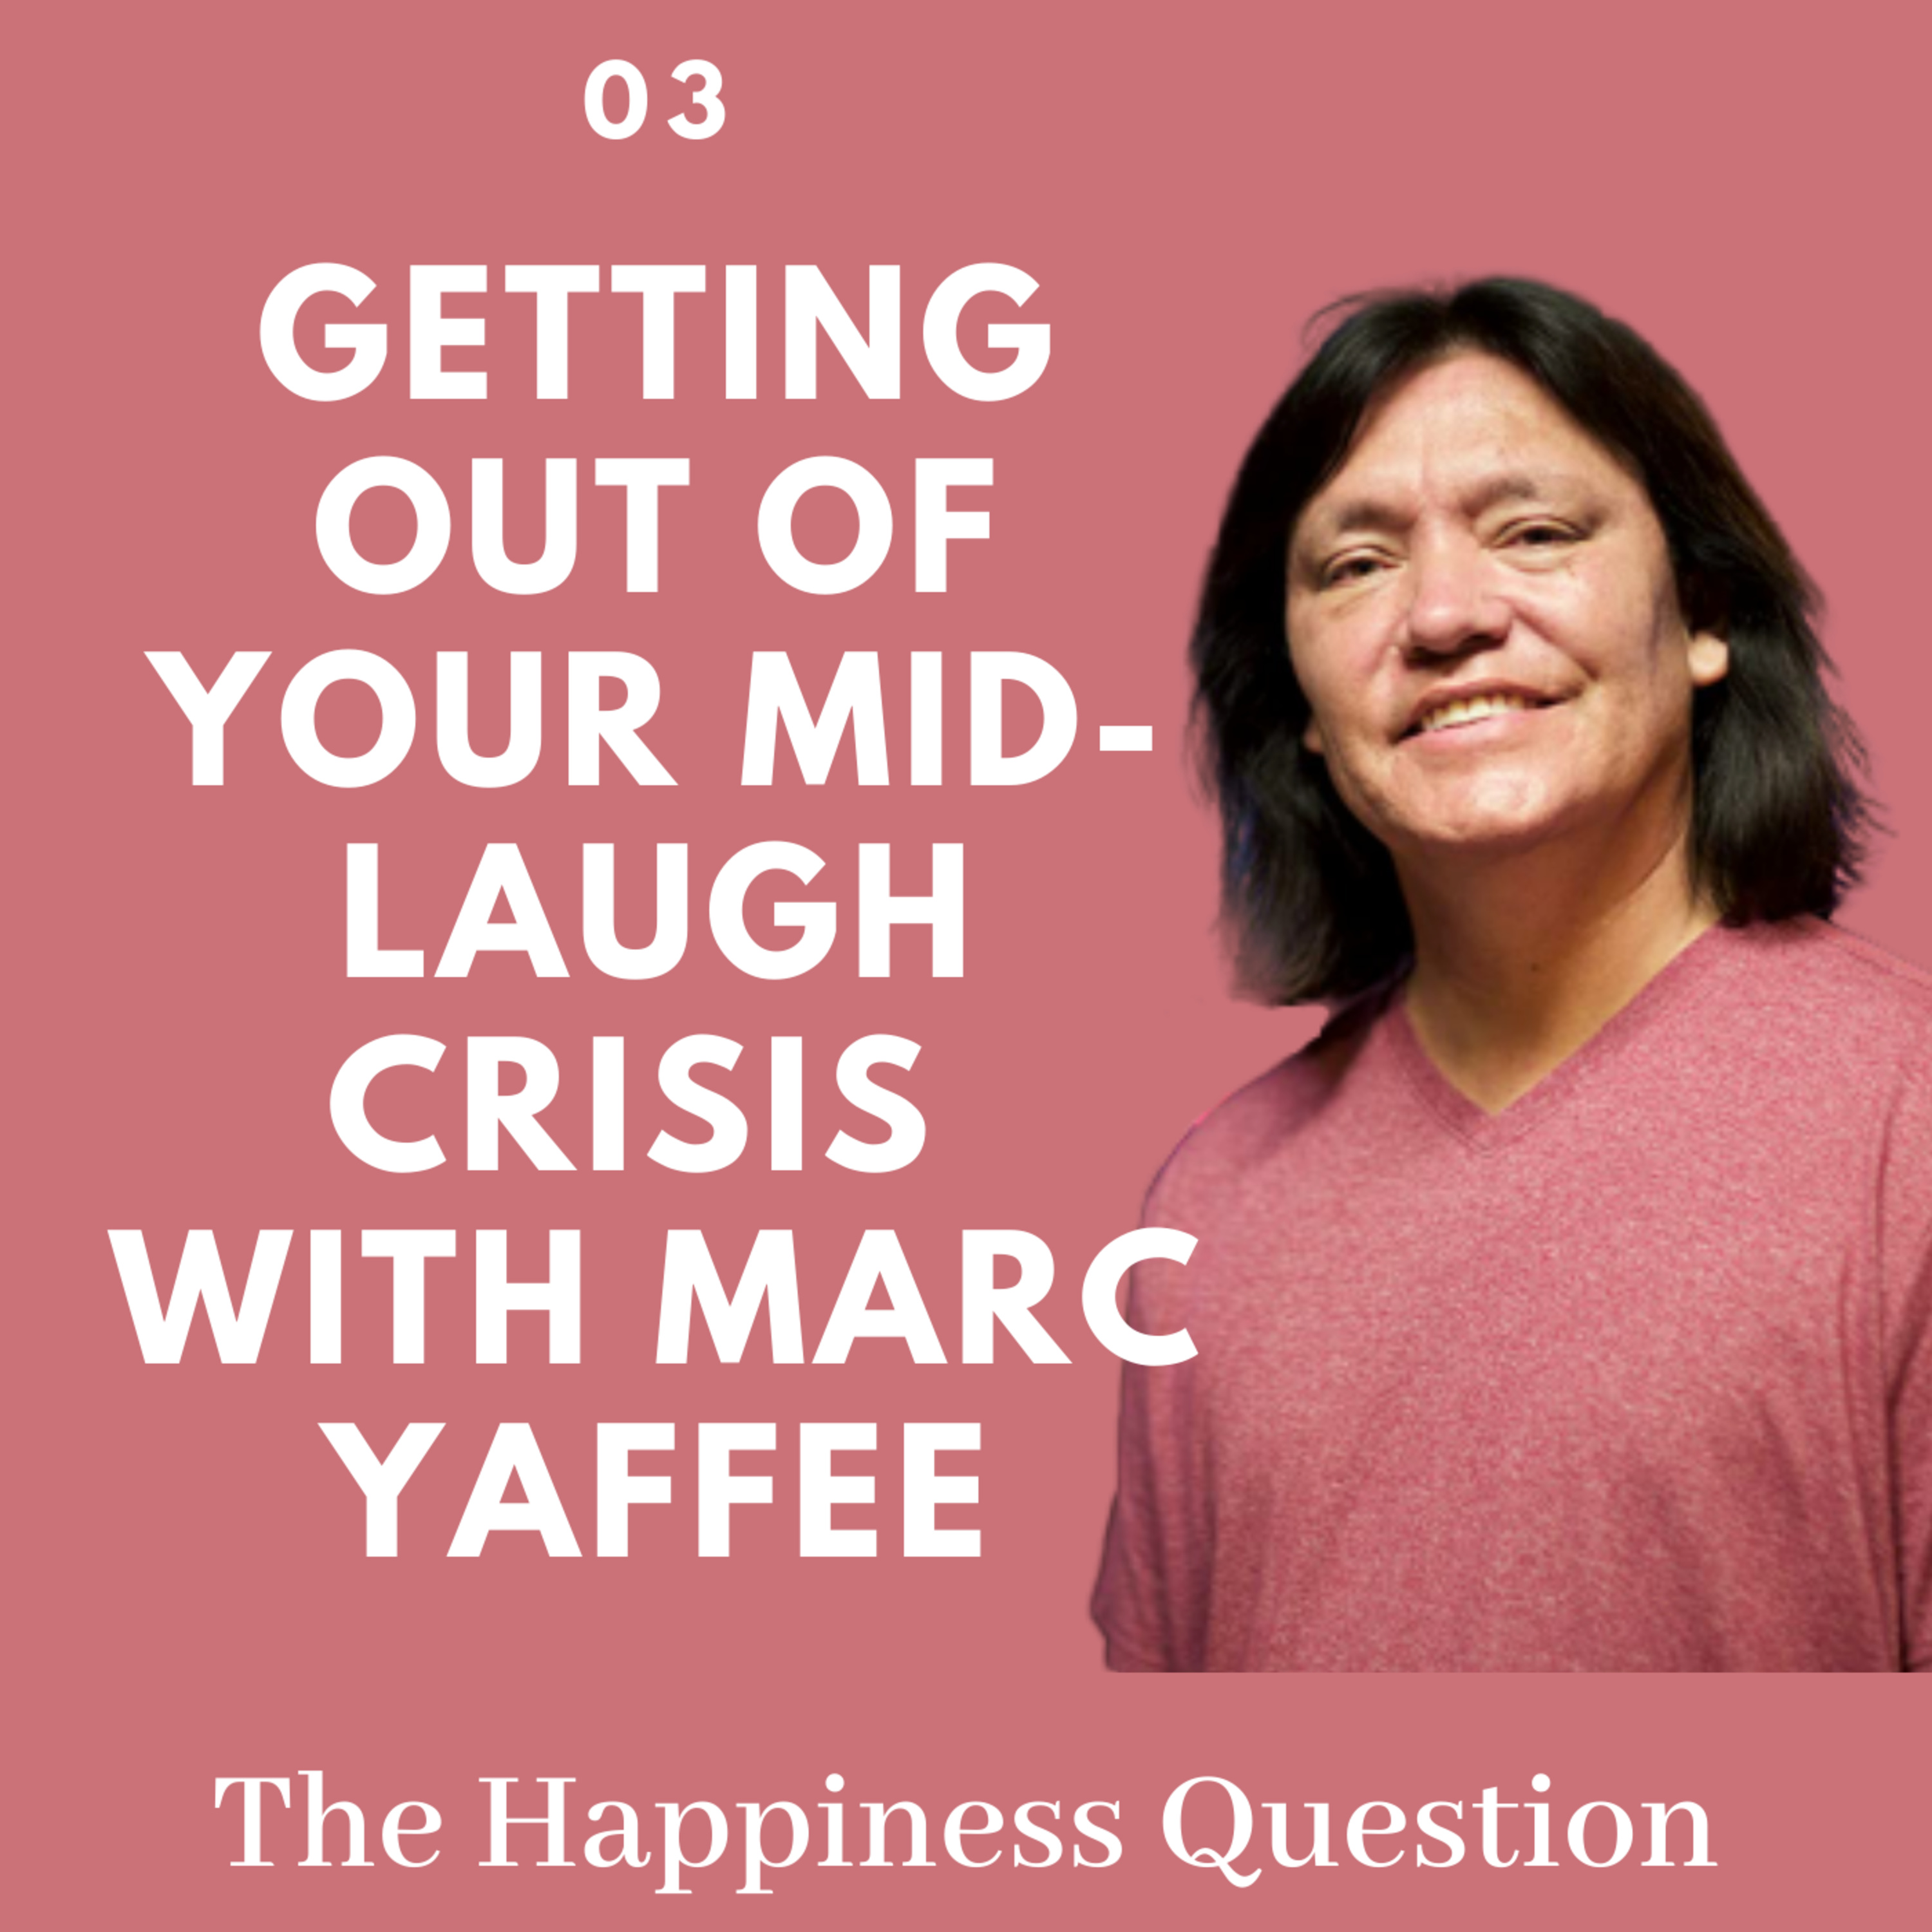 Getting out of Your Mid-Laugh Crisis with Marc Yaffee! | EP 3